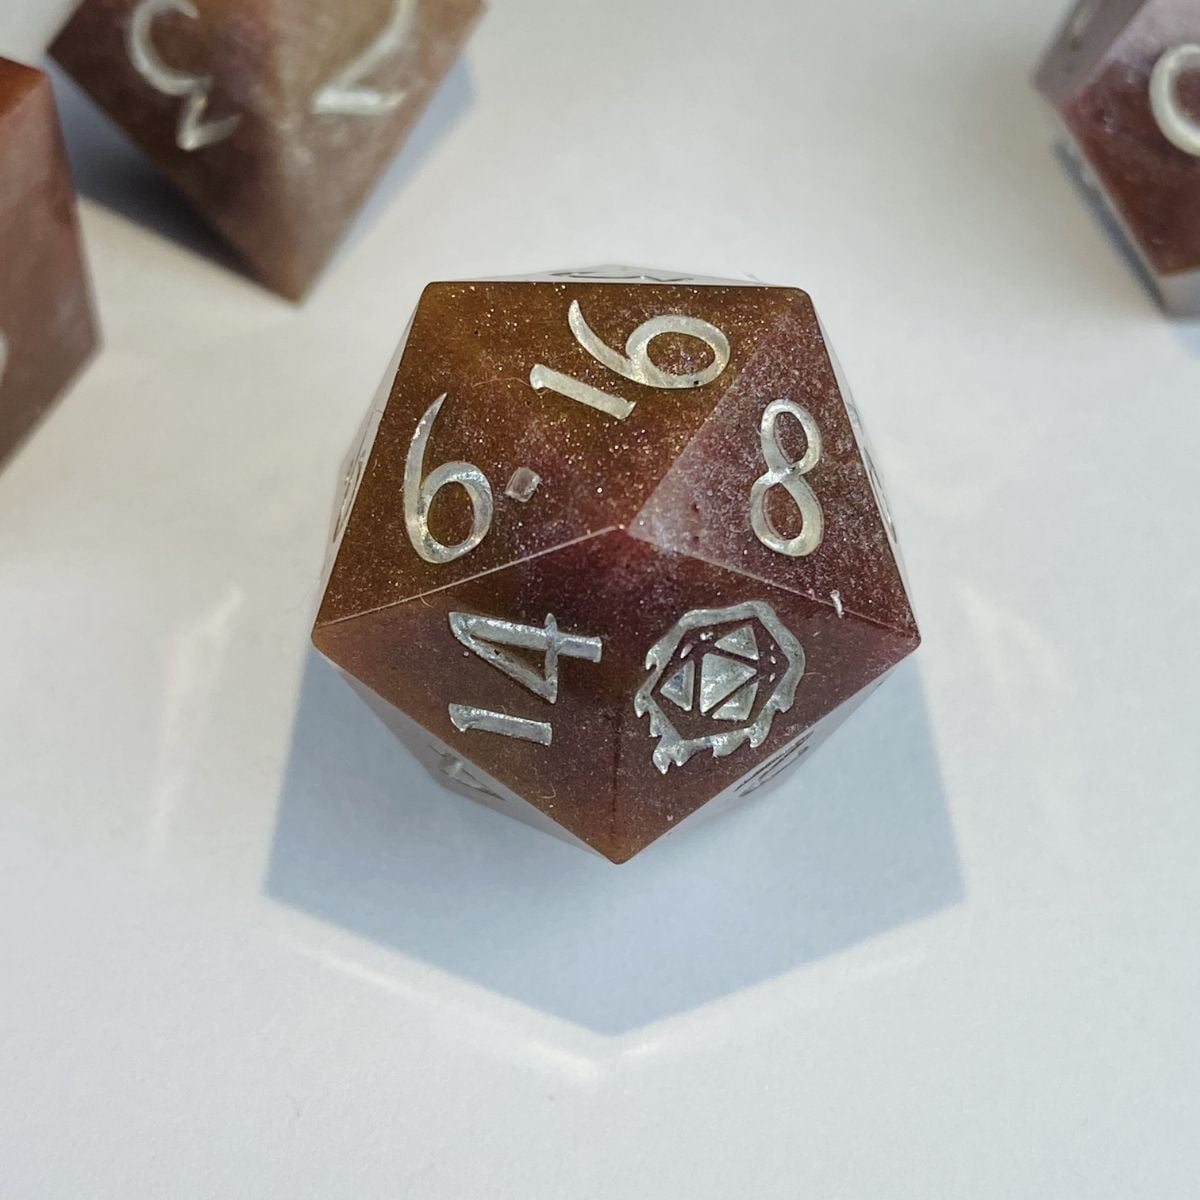 D20 Dungeons and Dragons Dice